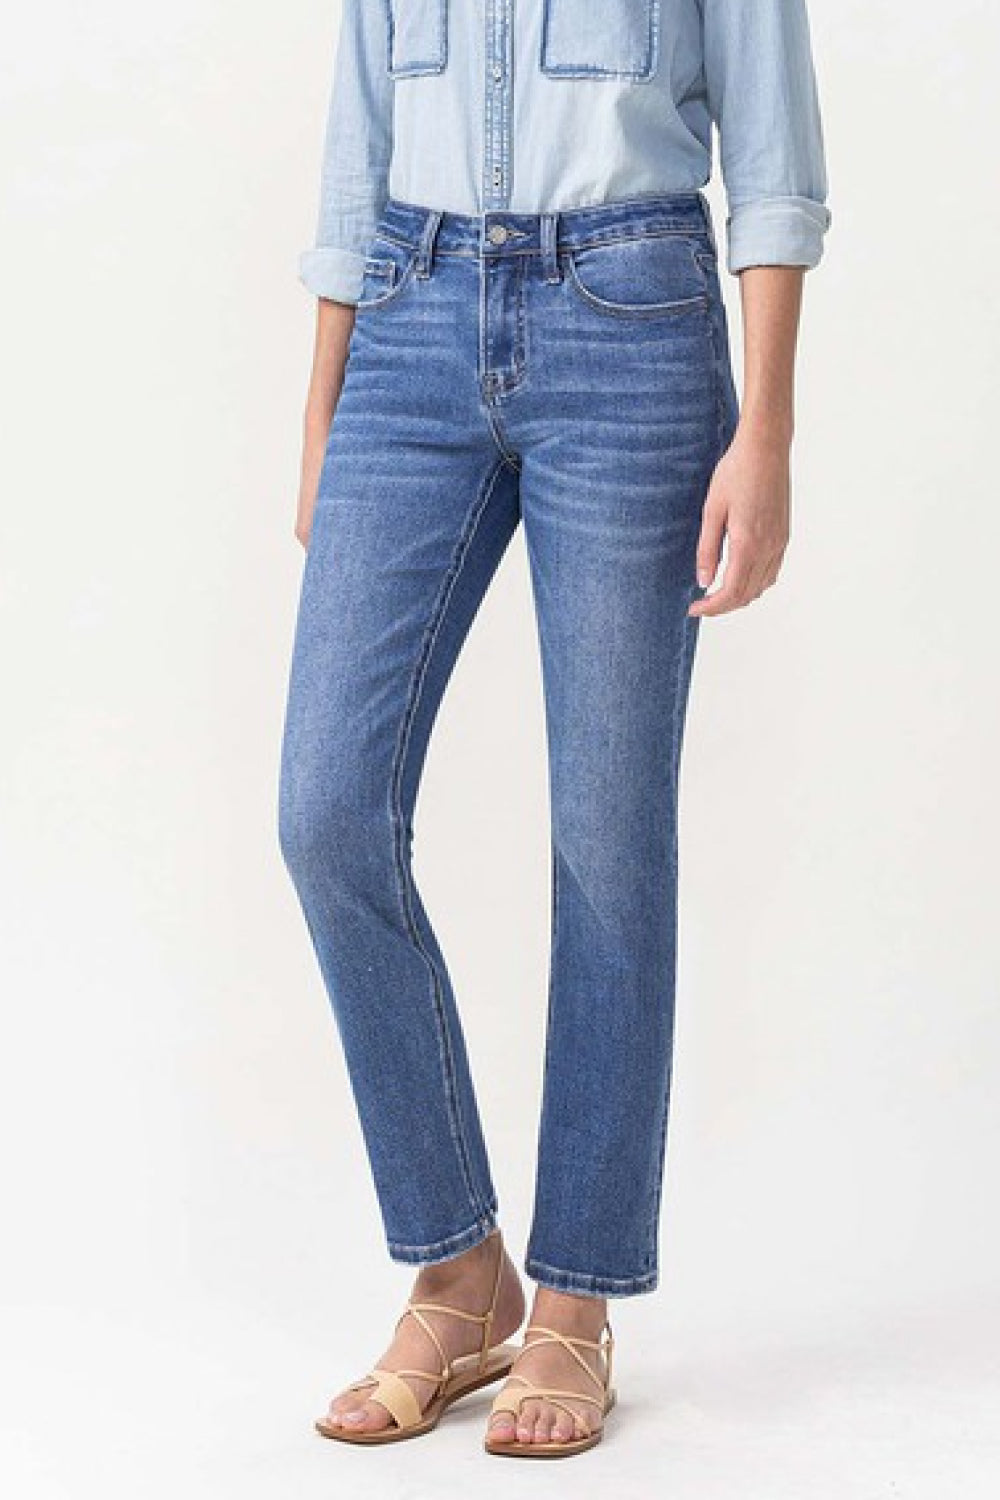 Lovervet Maggie Midrise Slim Ankle Straight Jeans - Online Only